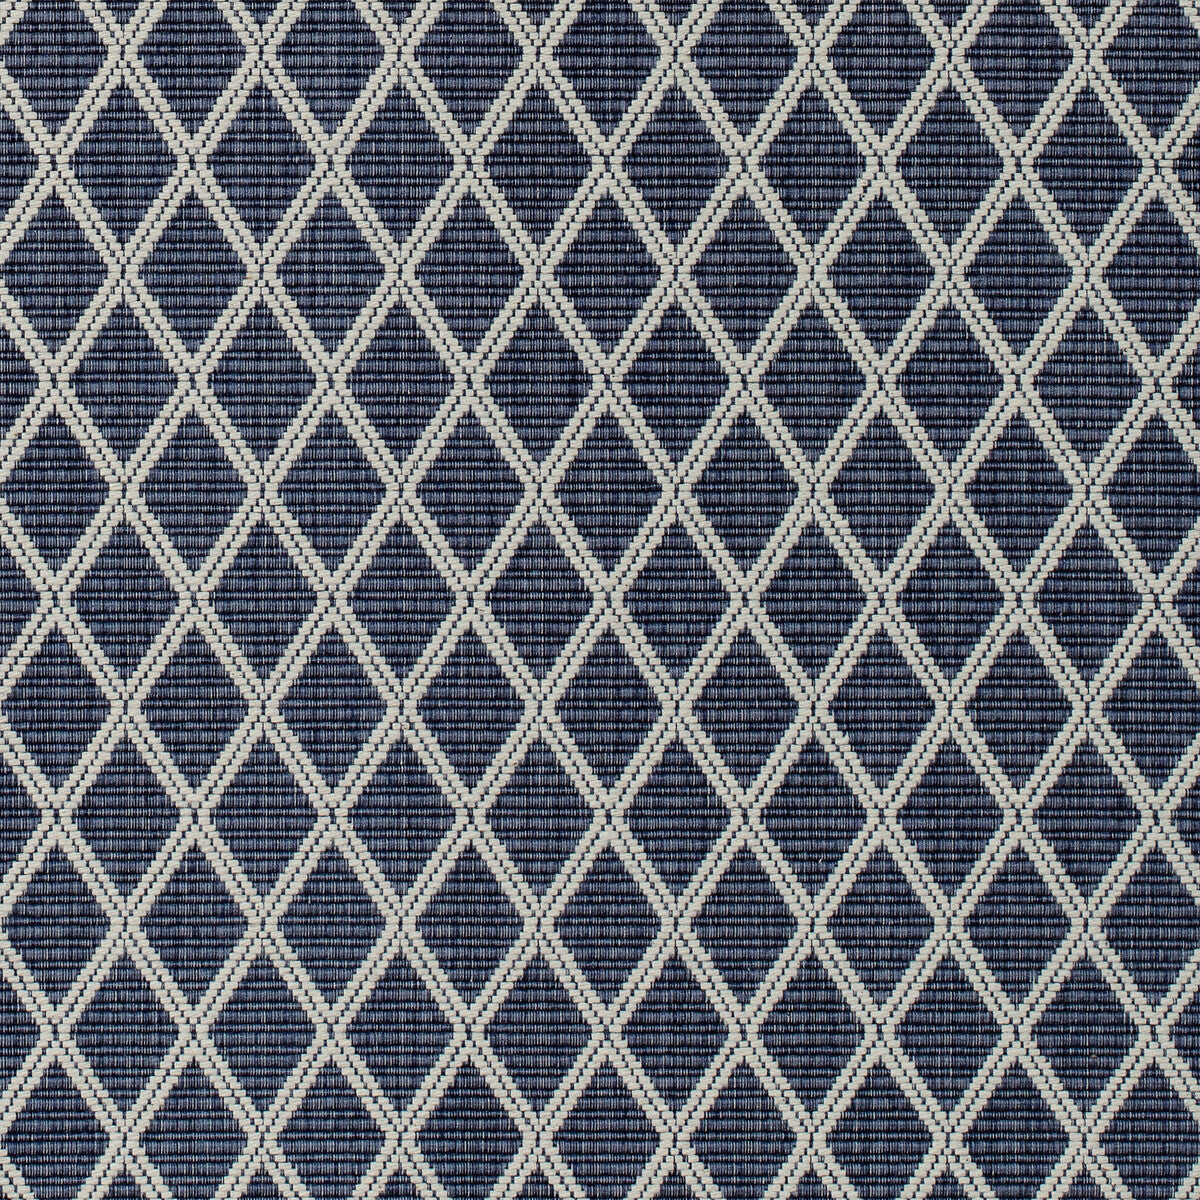 Cancale Woven fabric in navy color - pattern 8020109.50.0 - by Brunschwig &amp; Fils in the Granville Weaves collection